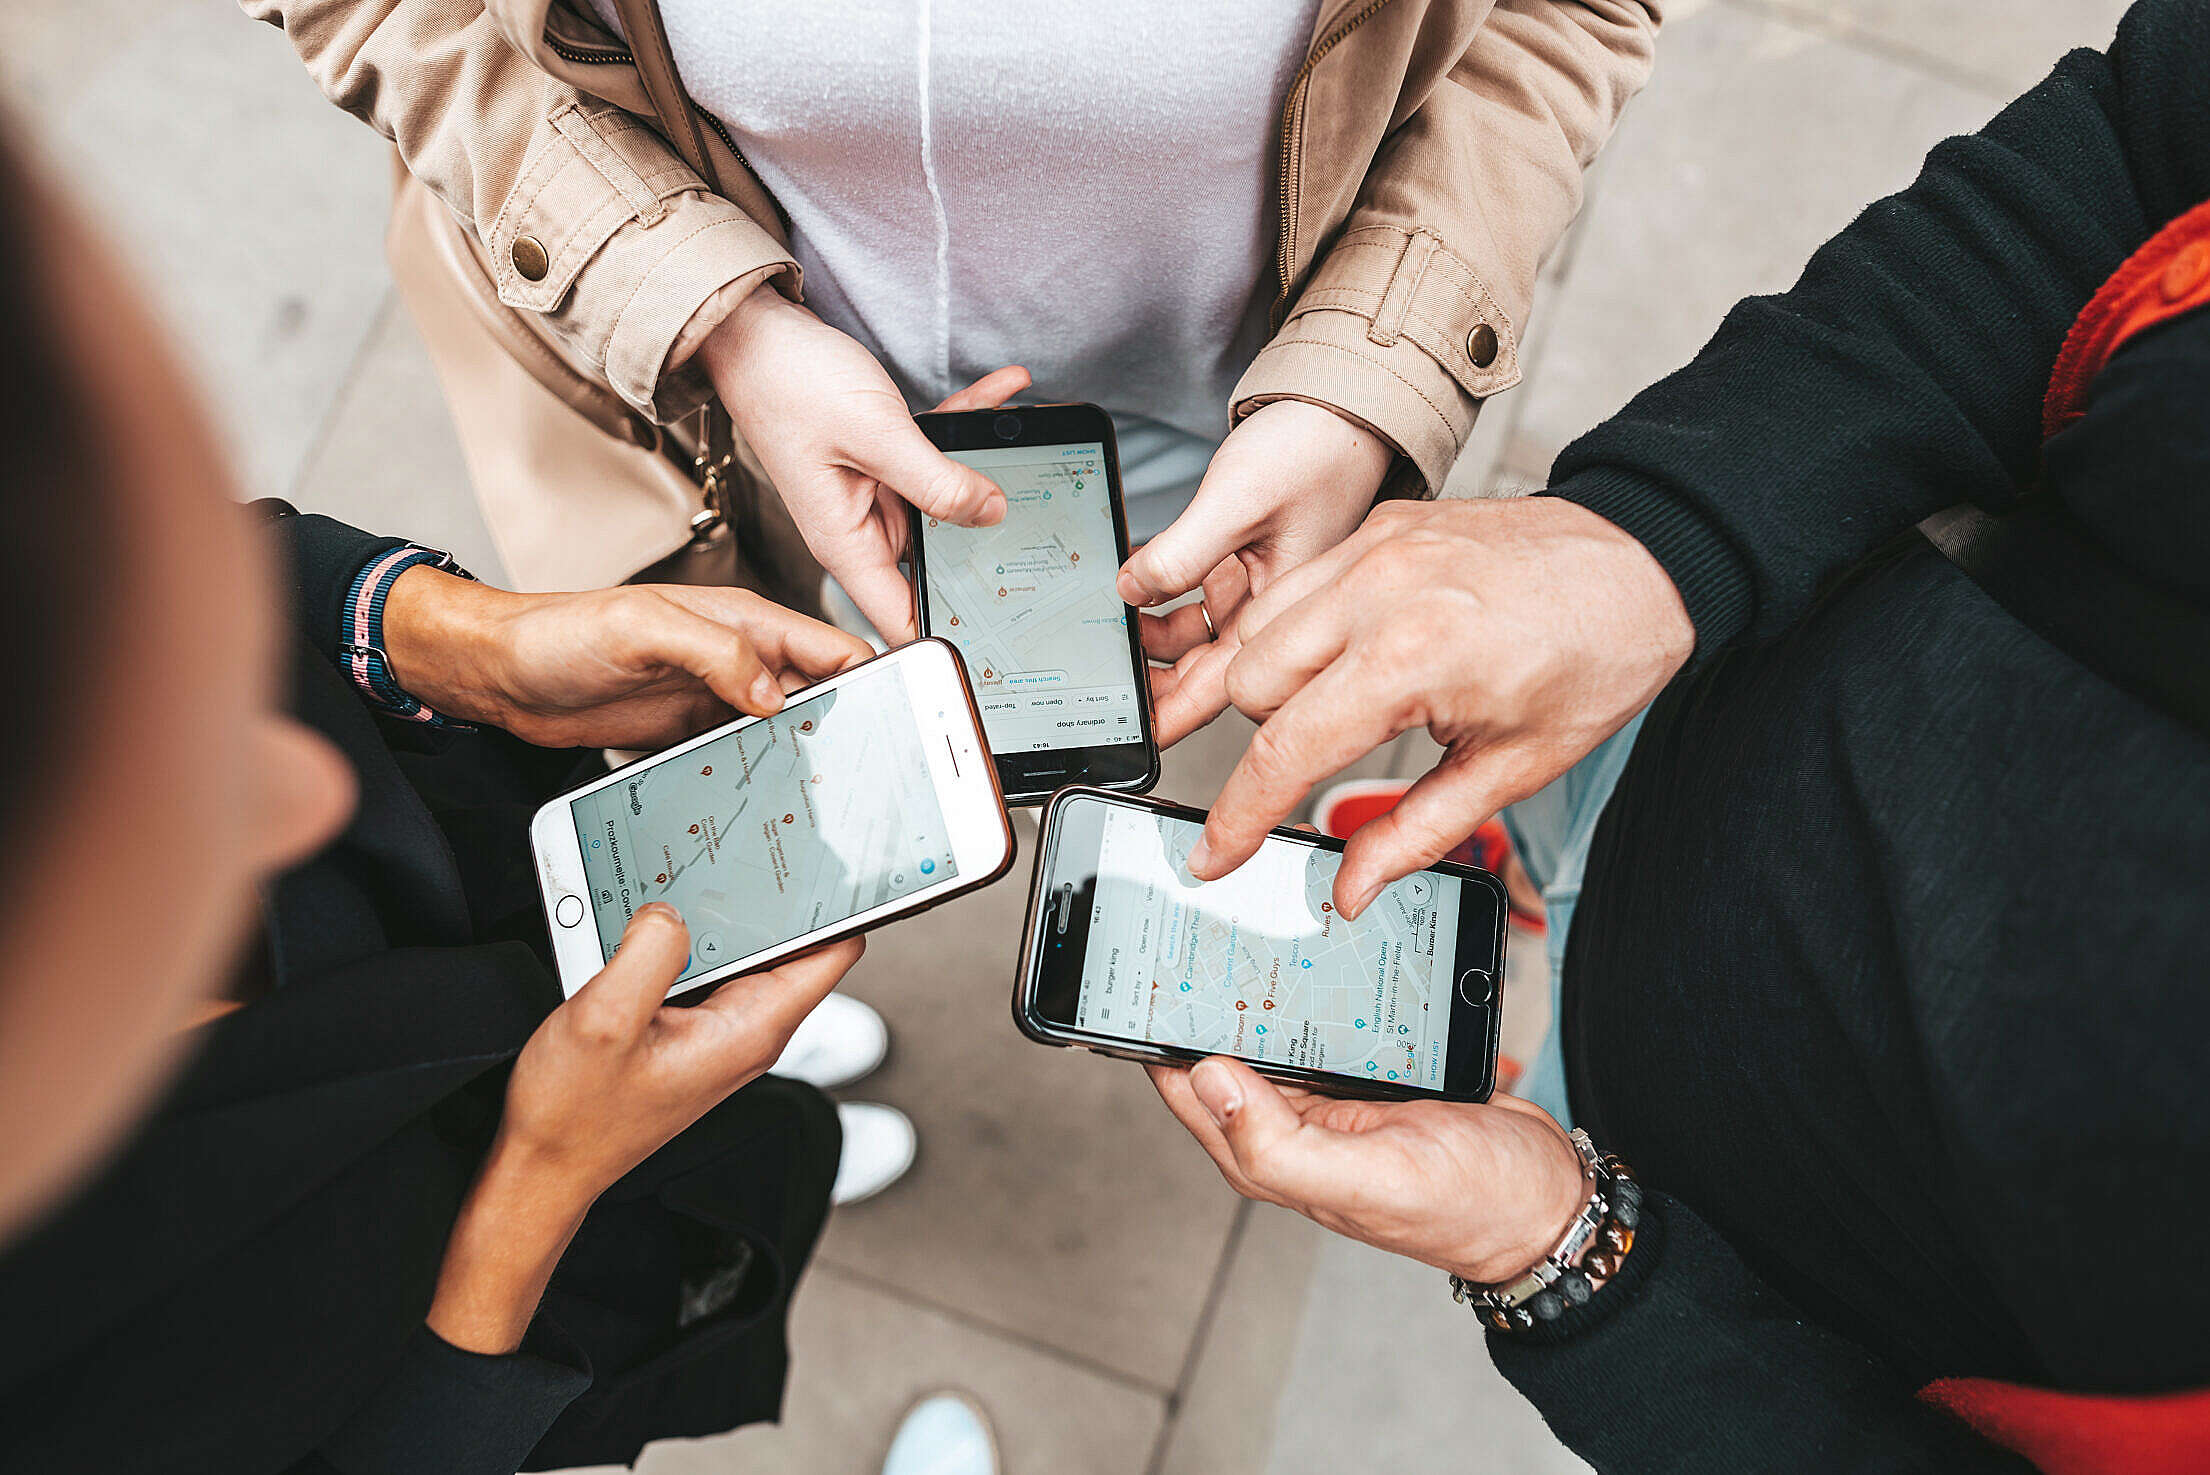 Friends Using Their Smartphones to Find The Right Way Free Stock Photo